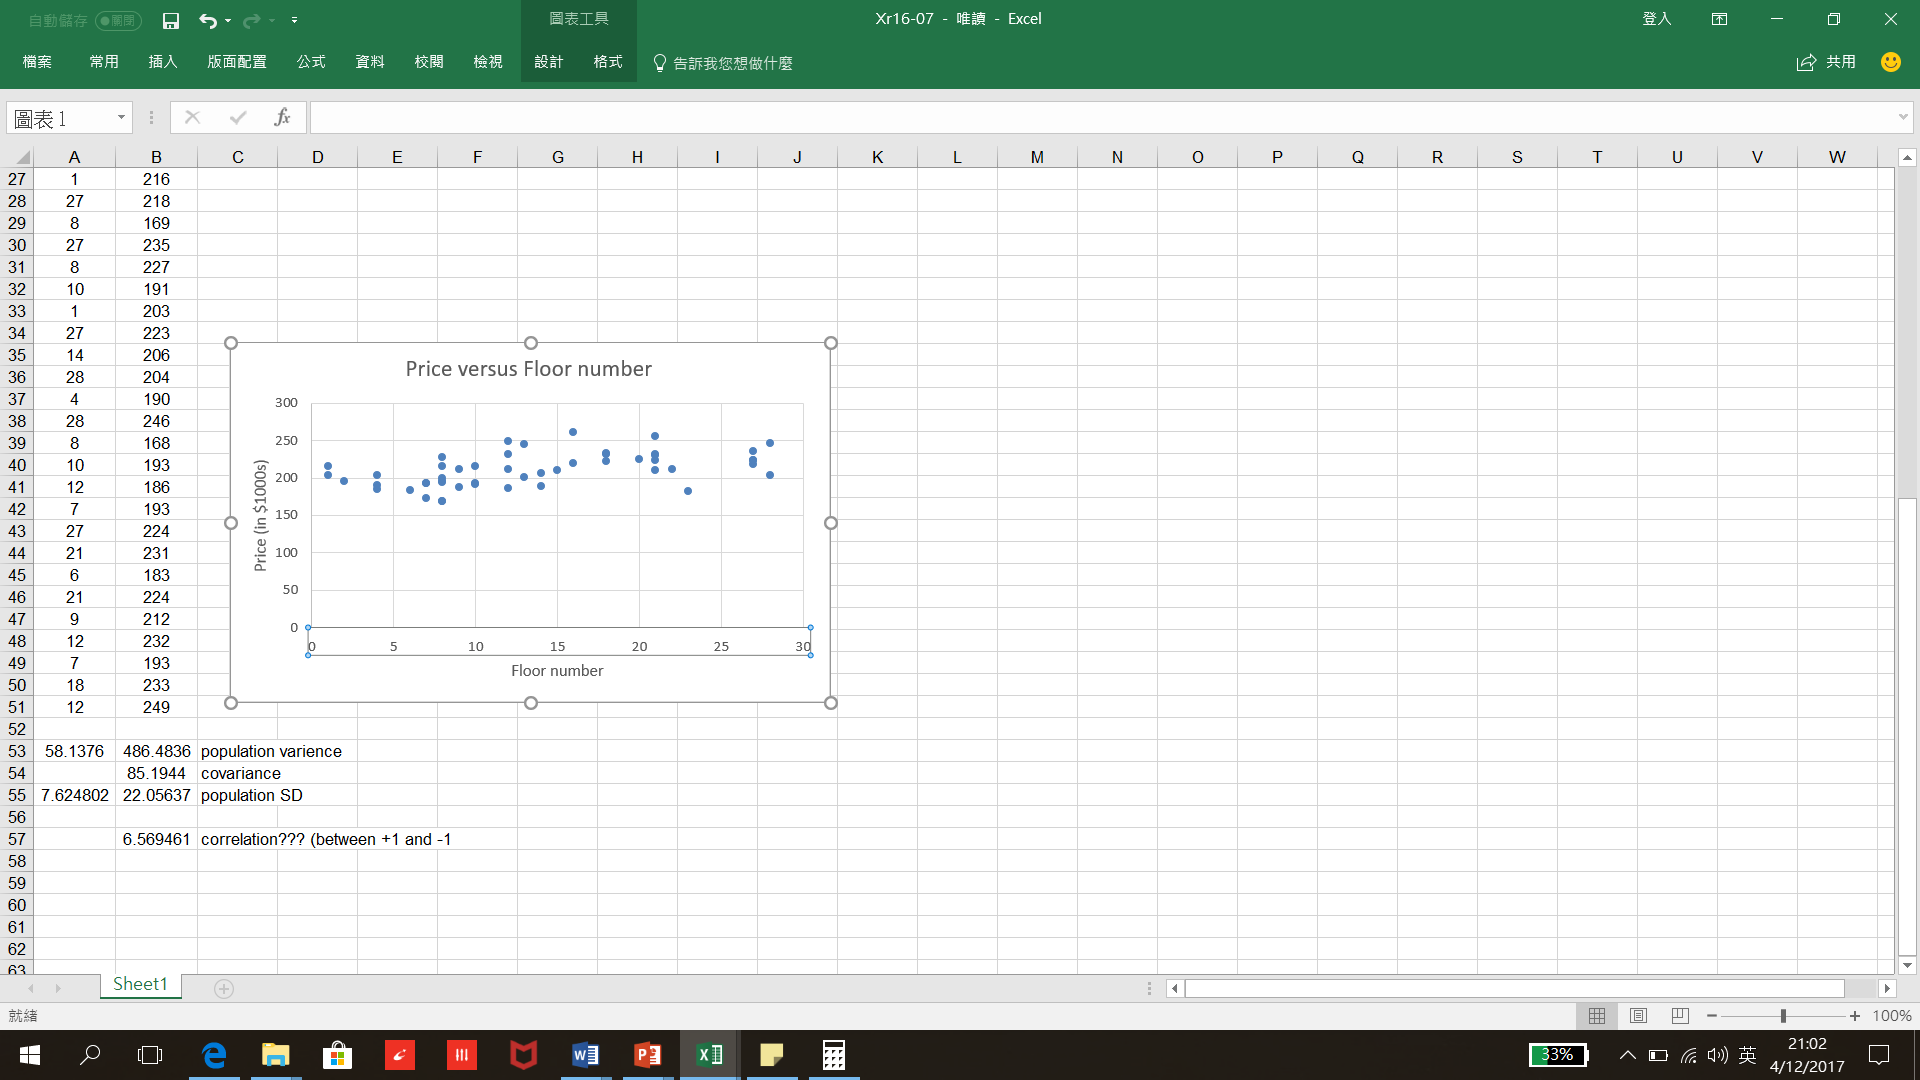 This is what I got from excel